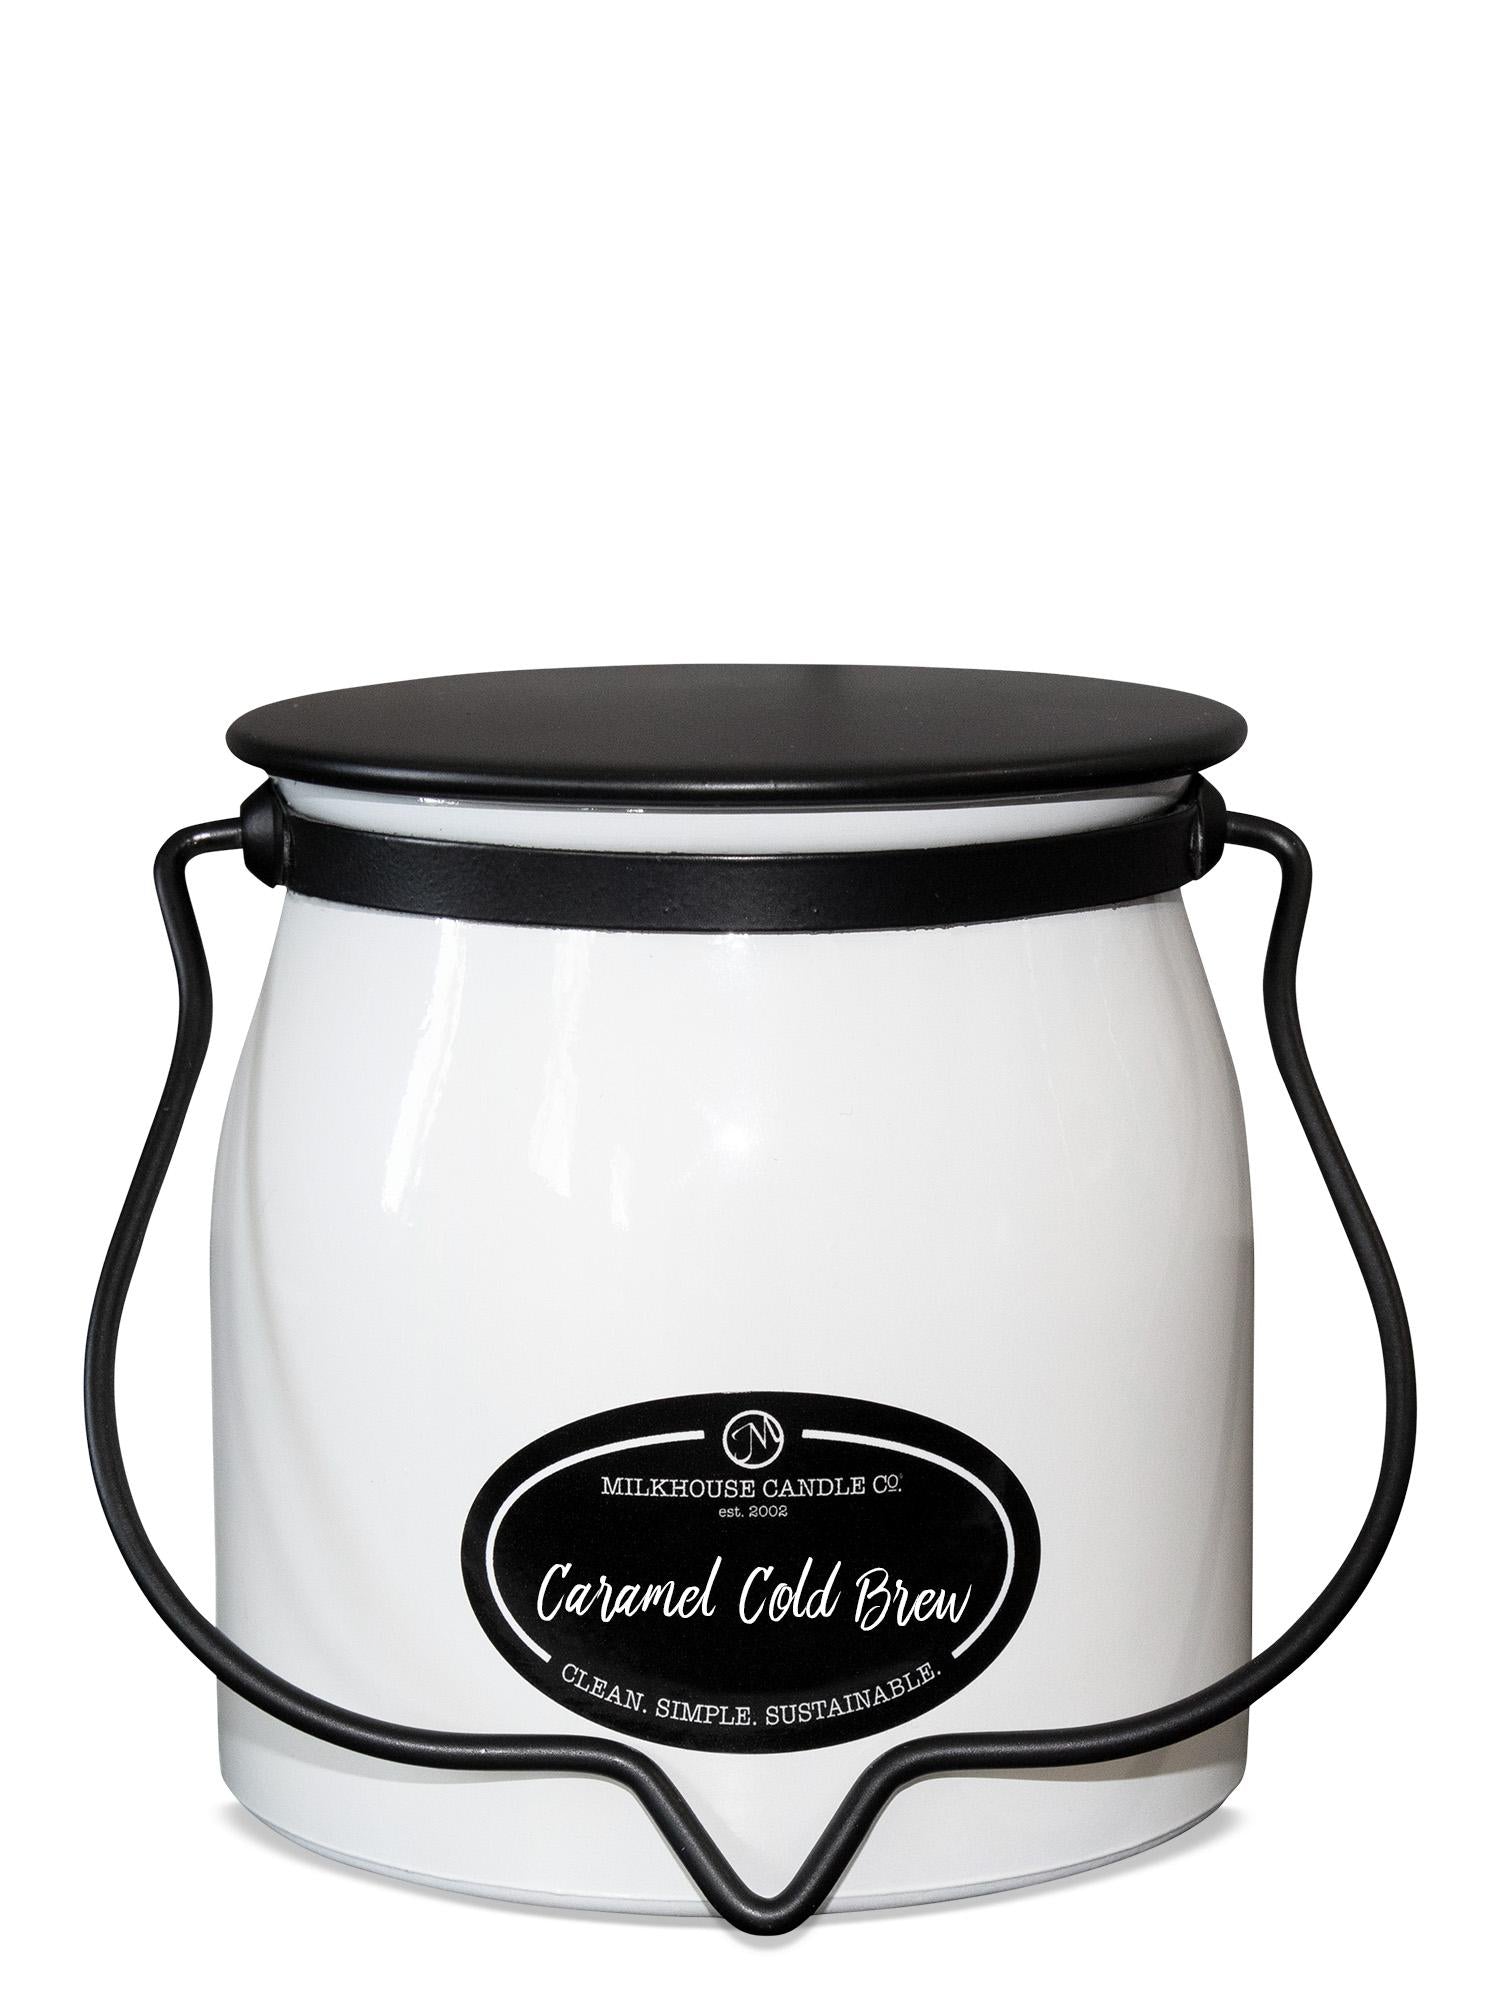 Caramel Cold Brew Milkhouse Candle 16 oz.